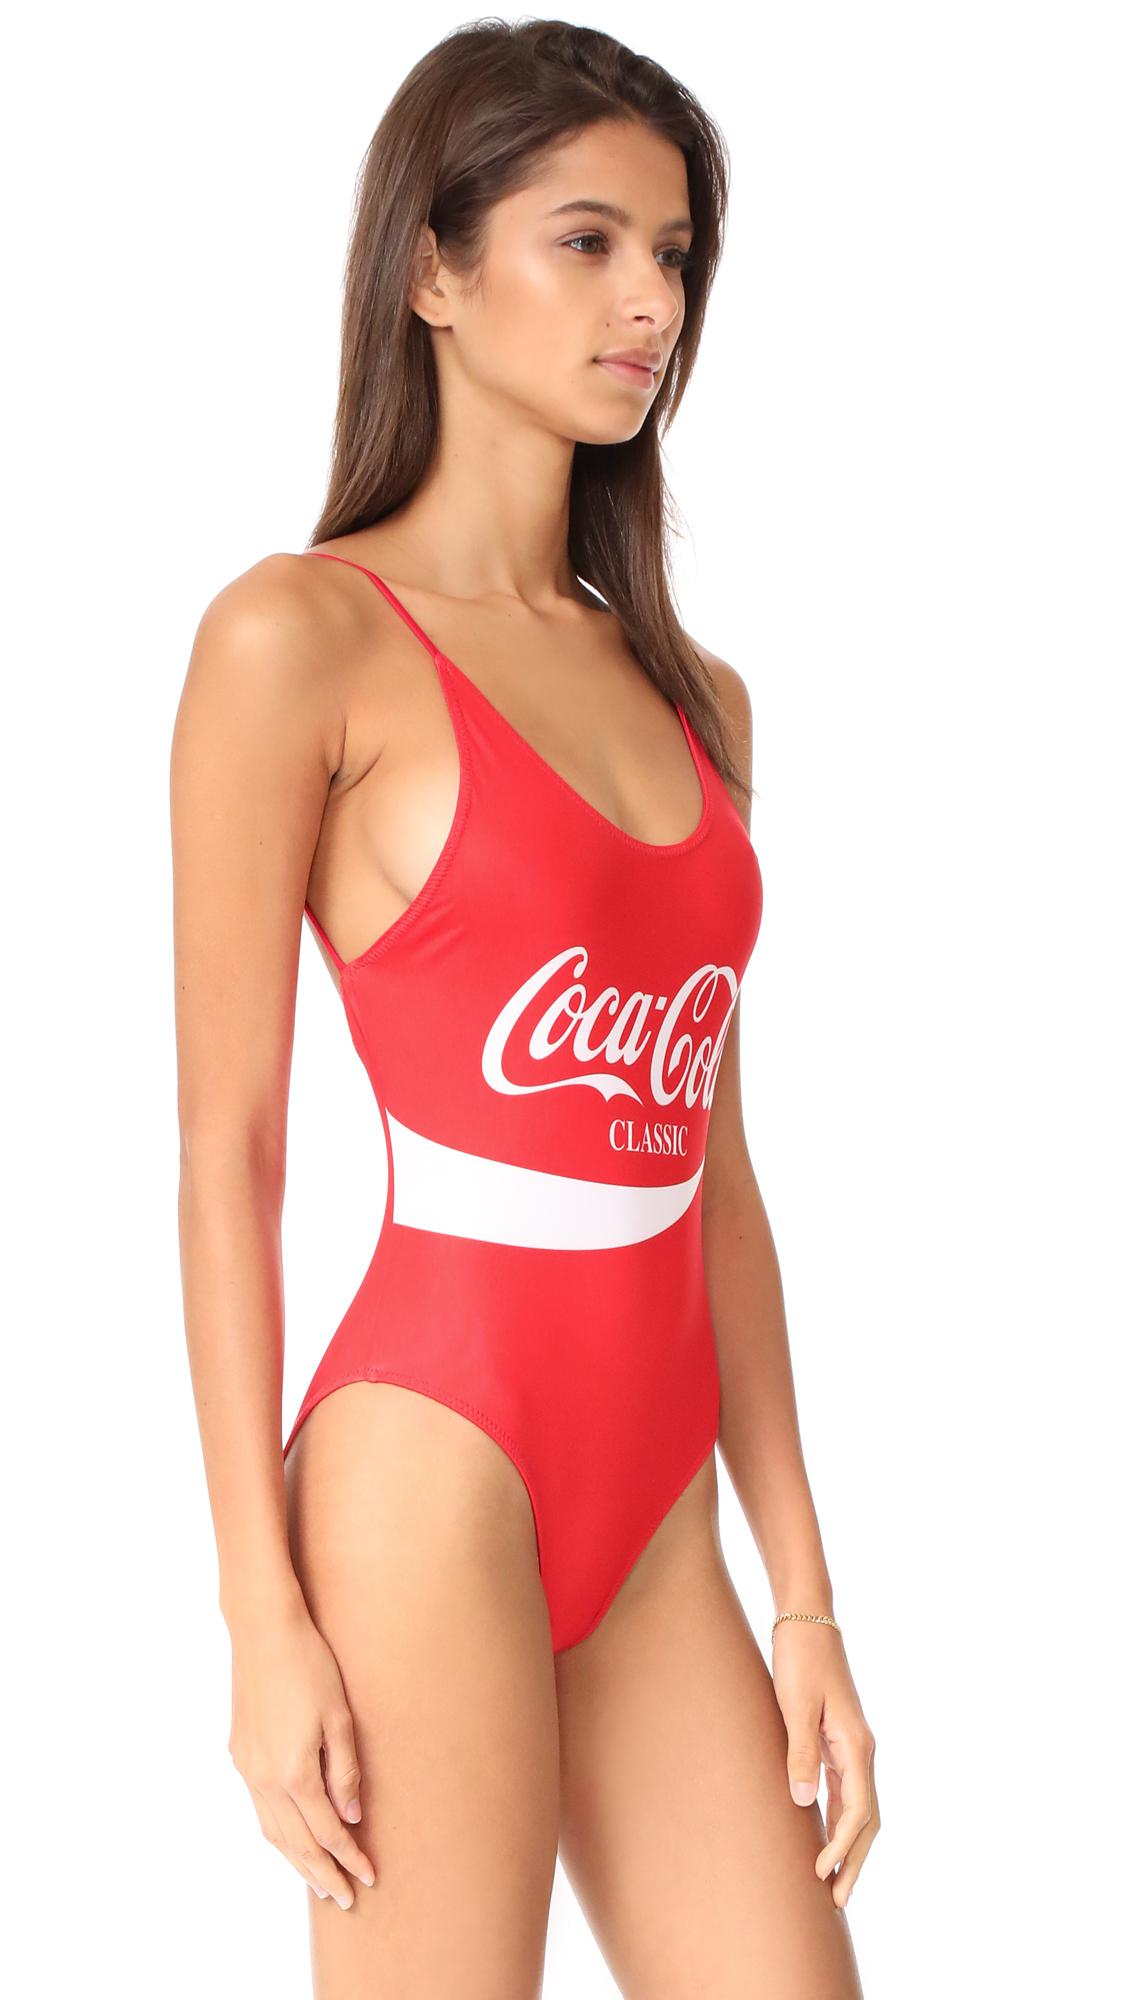 Coca Cola Swimsuit One Piece Italy Save 50 Dbslongding Org